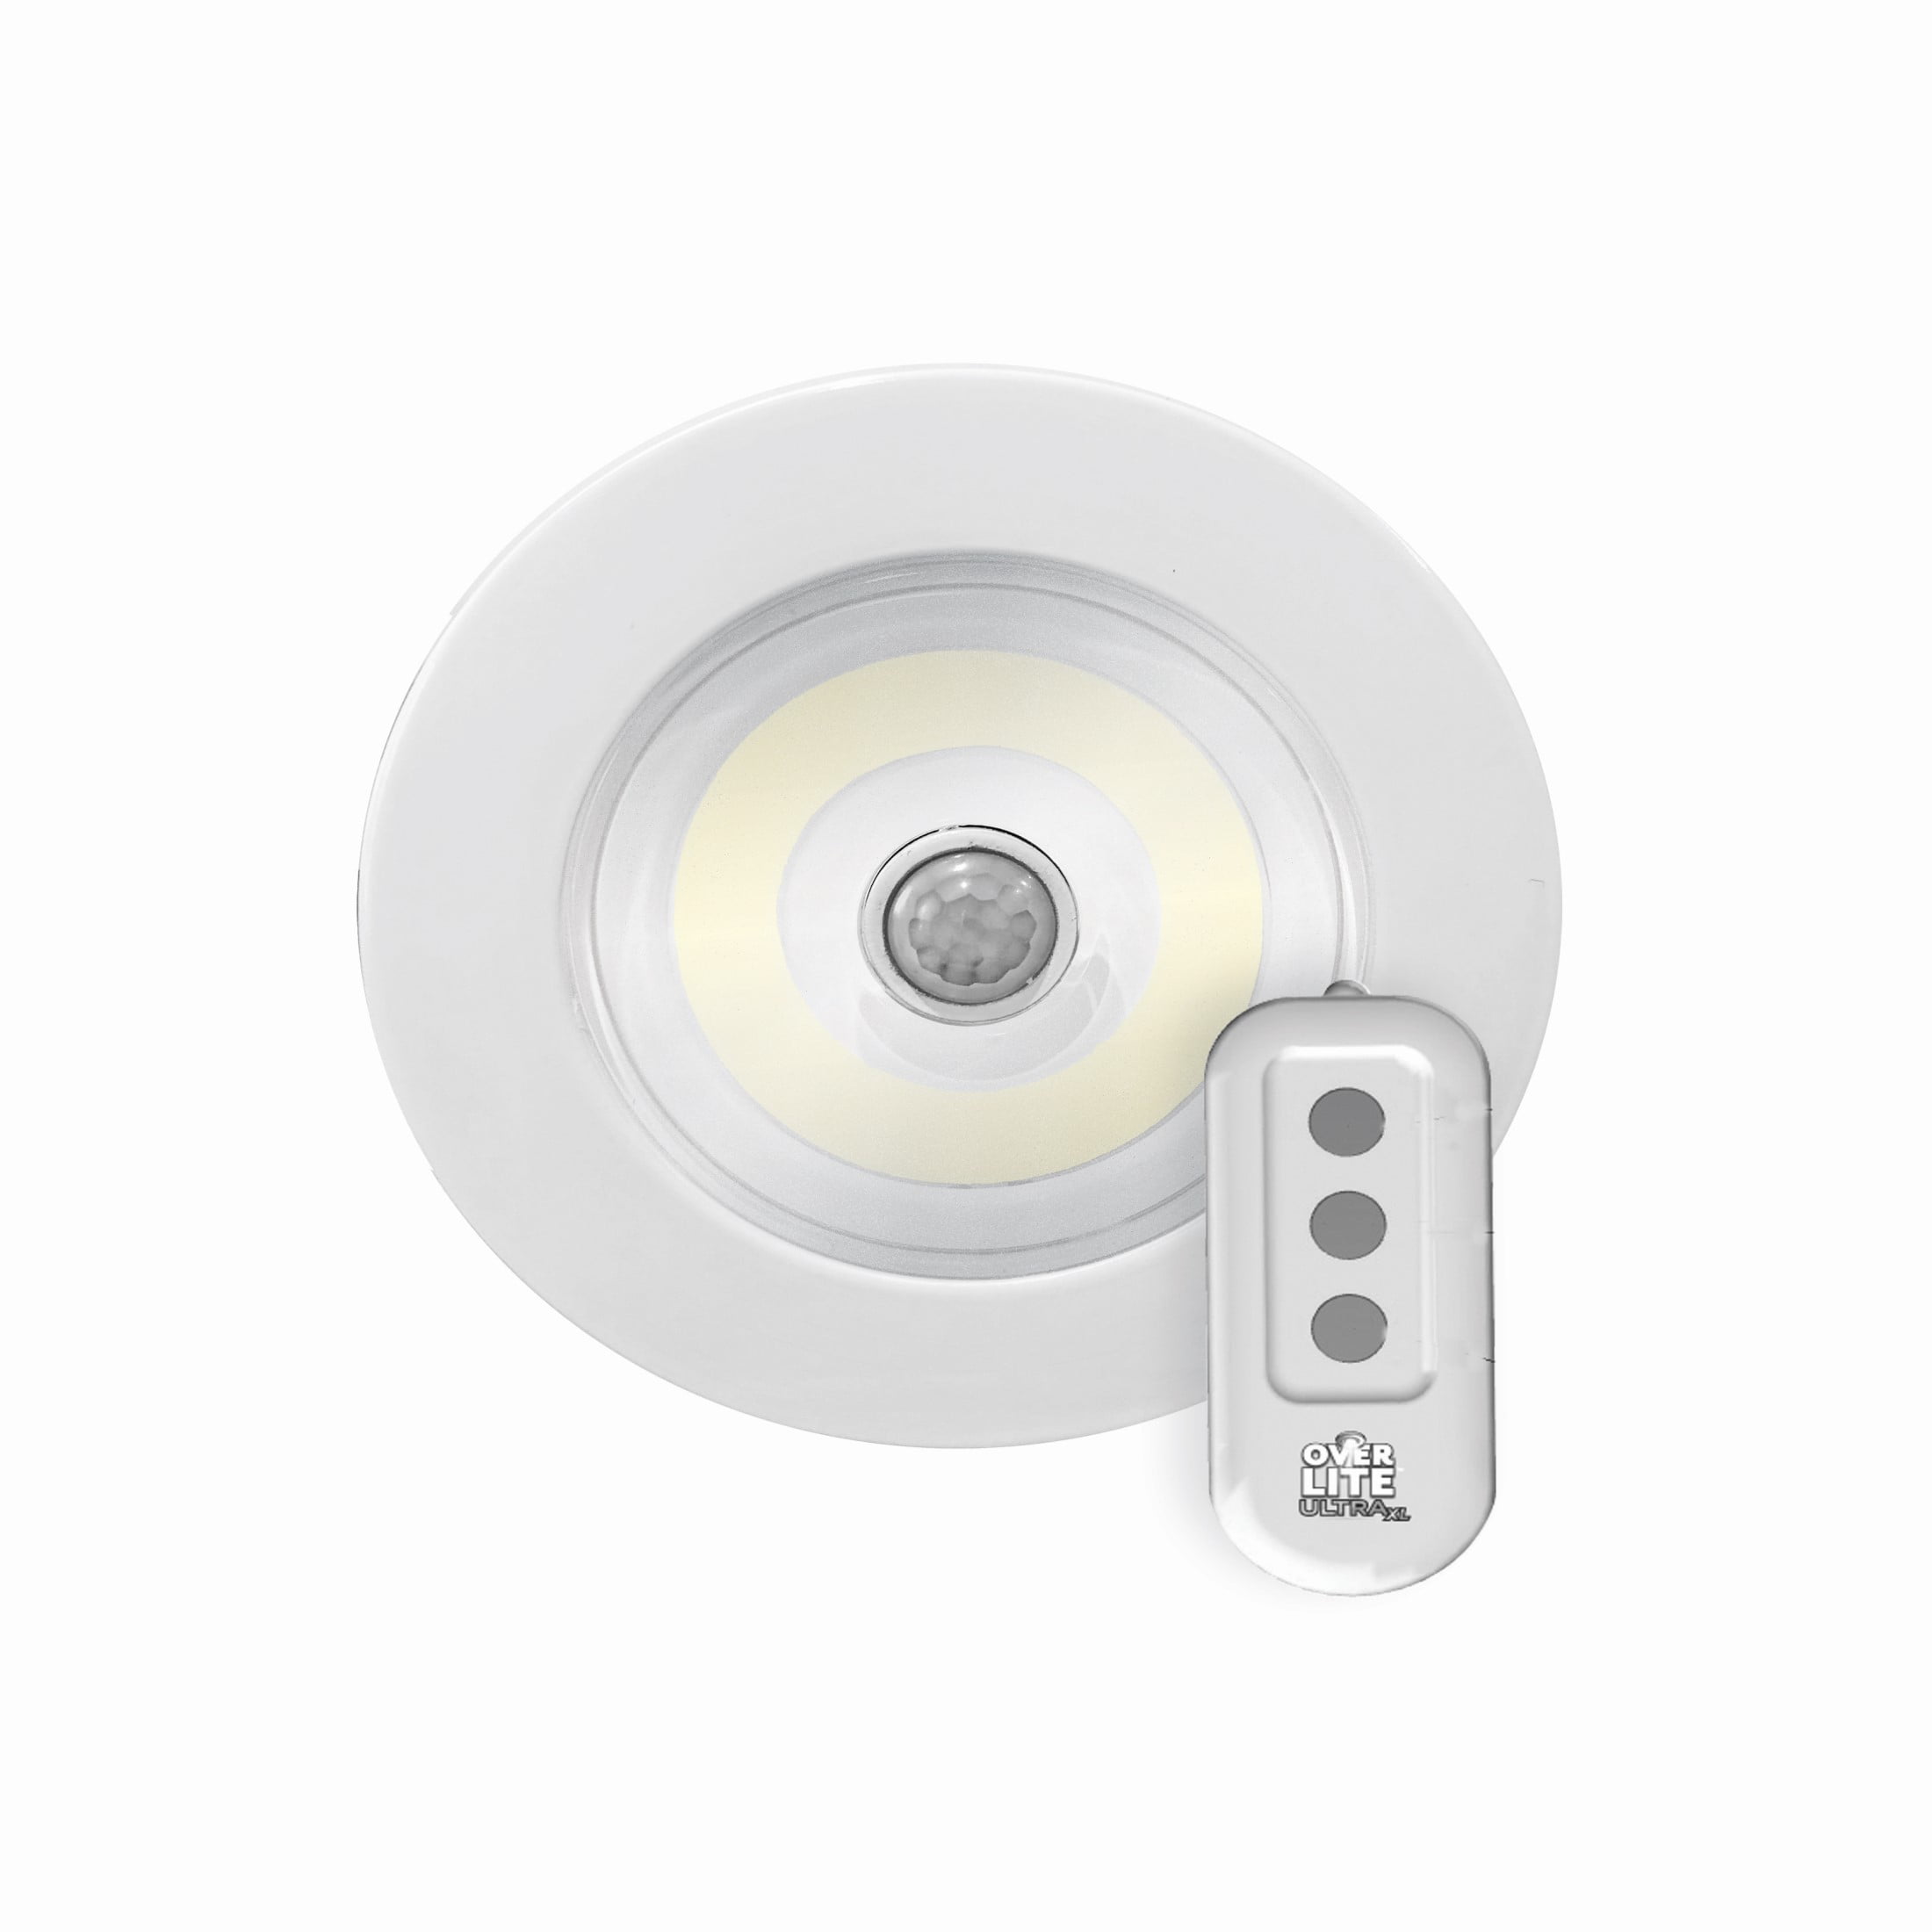 Over Lite Ultra 3x Motion Activated Ceiling Wall Light Remote Control 400 Lumens for sale online 